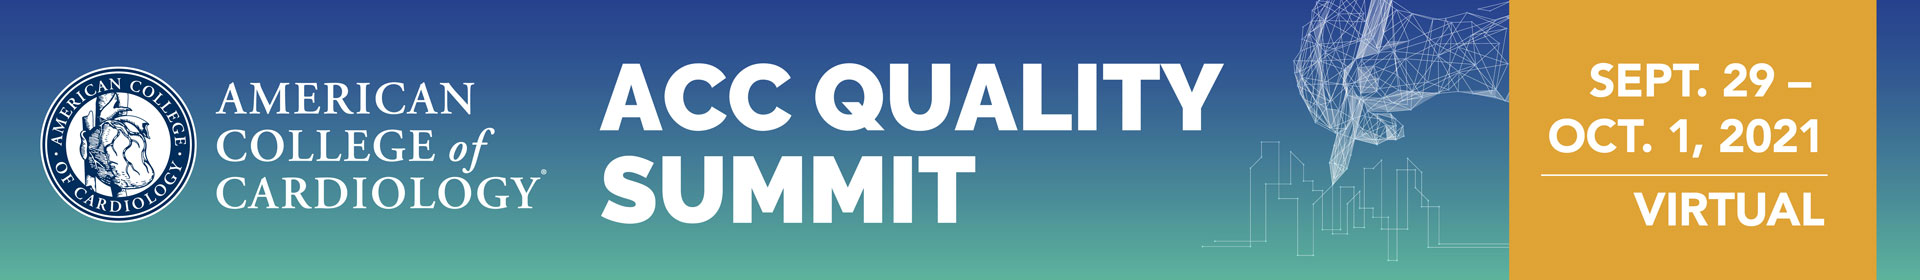 2021 ACC Quality Summit Event Banner